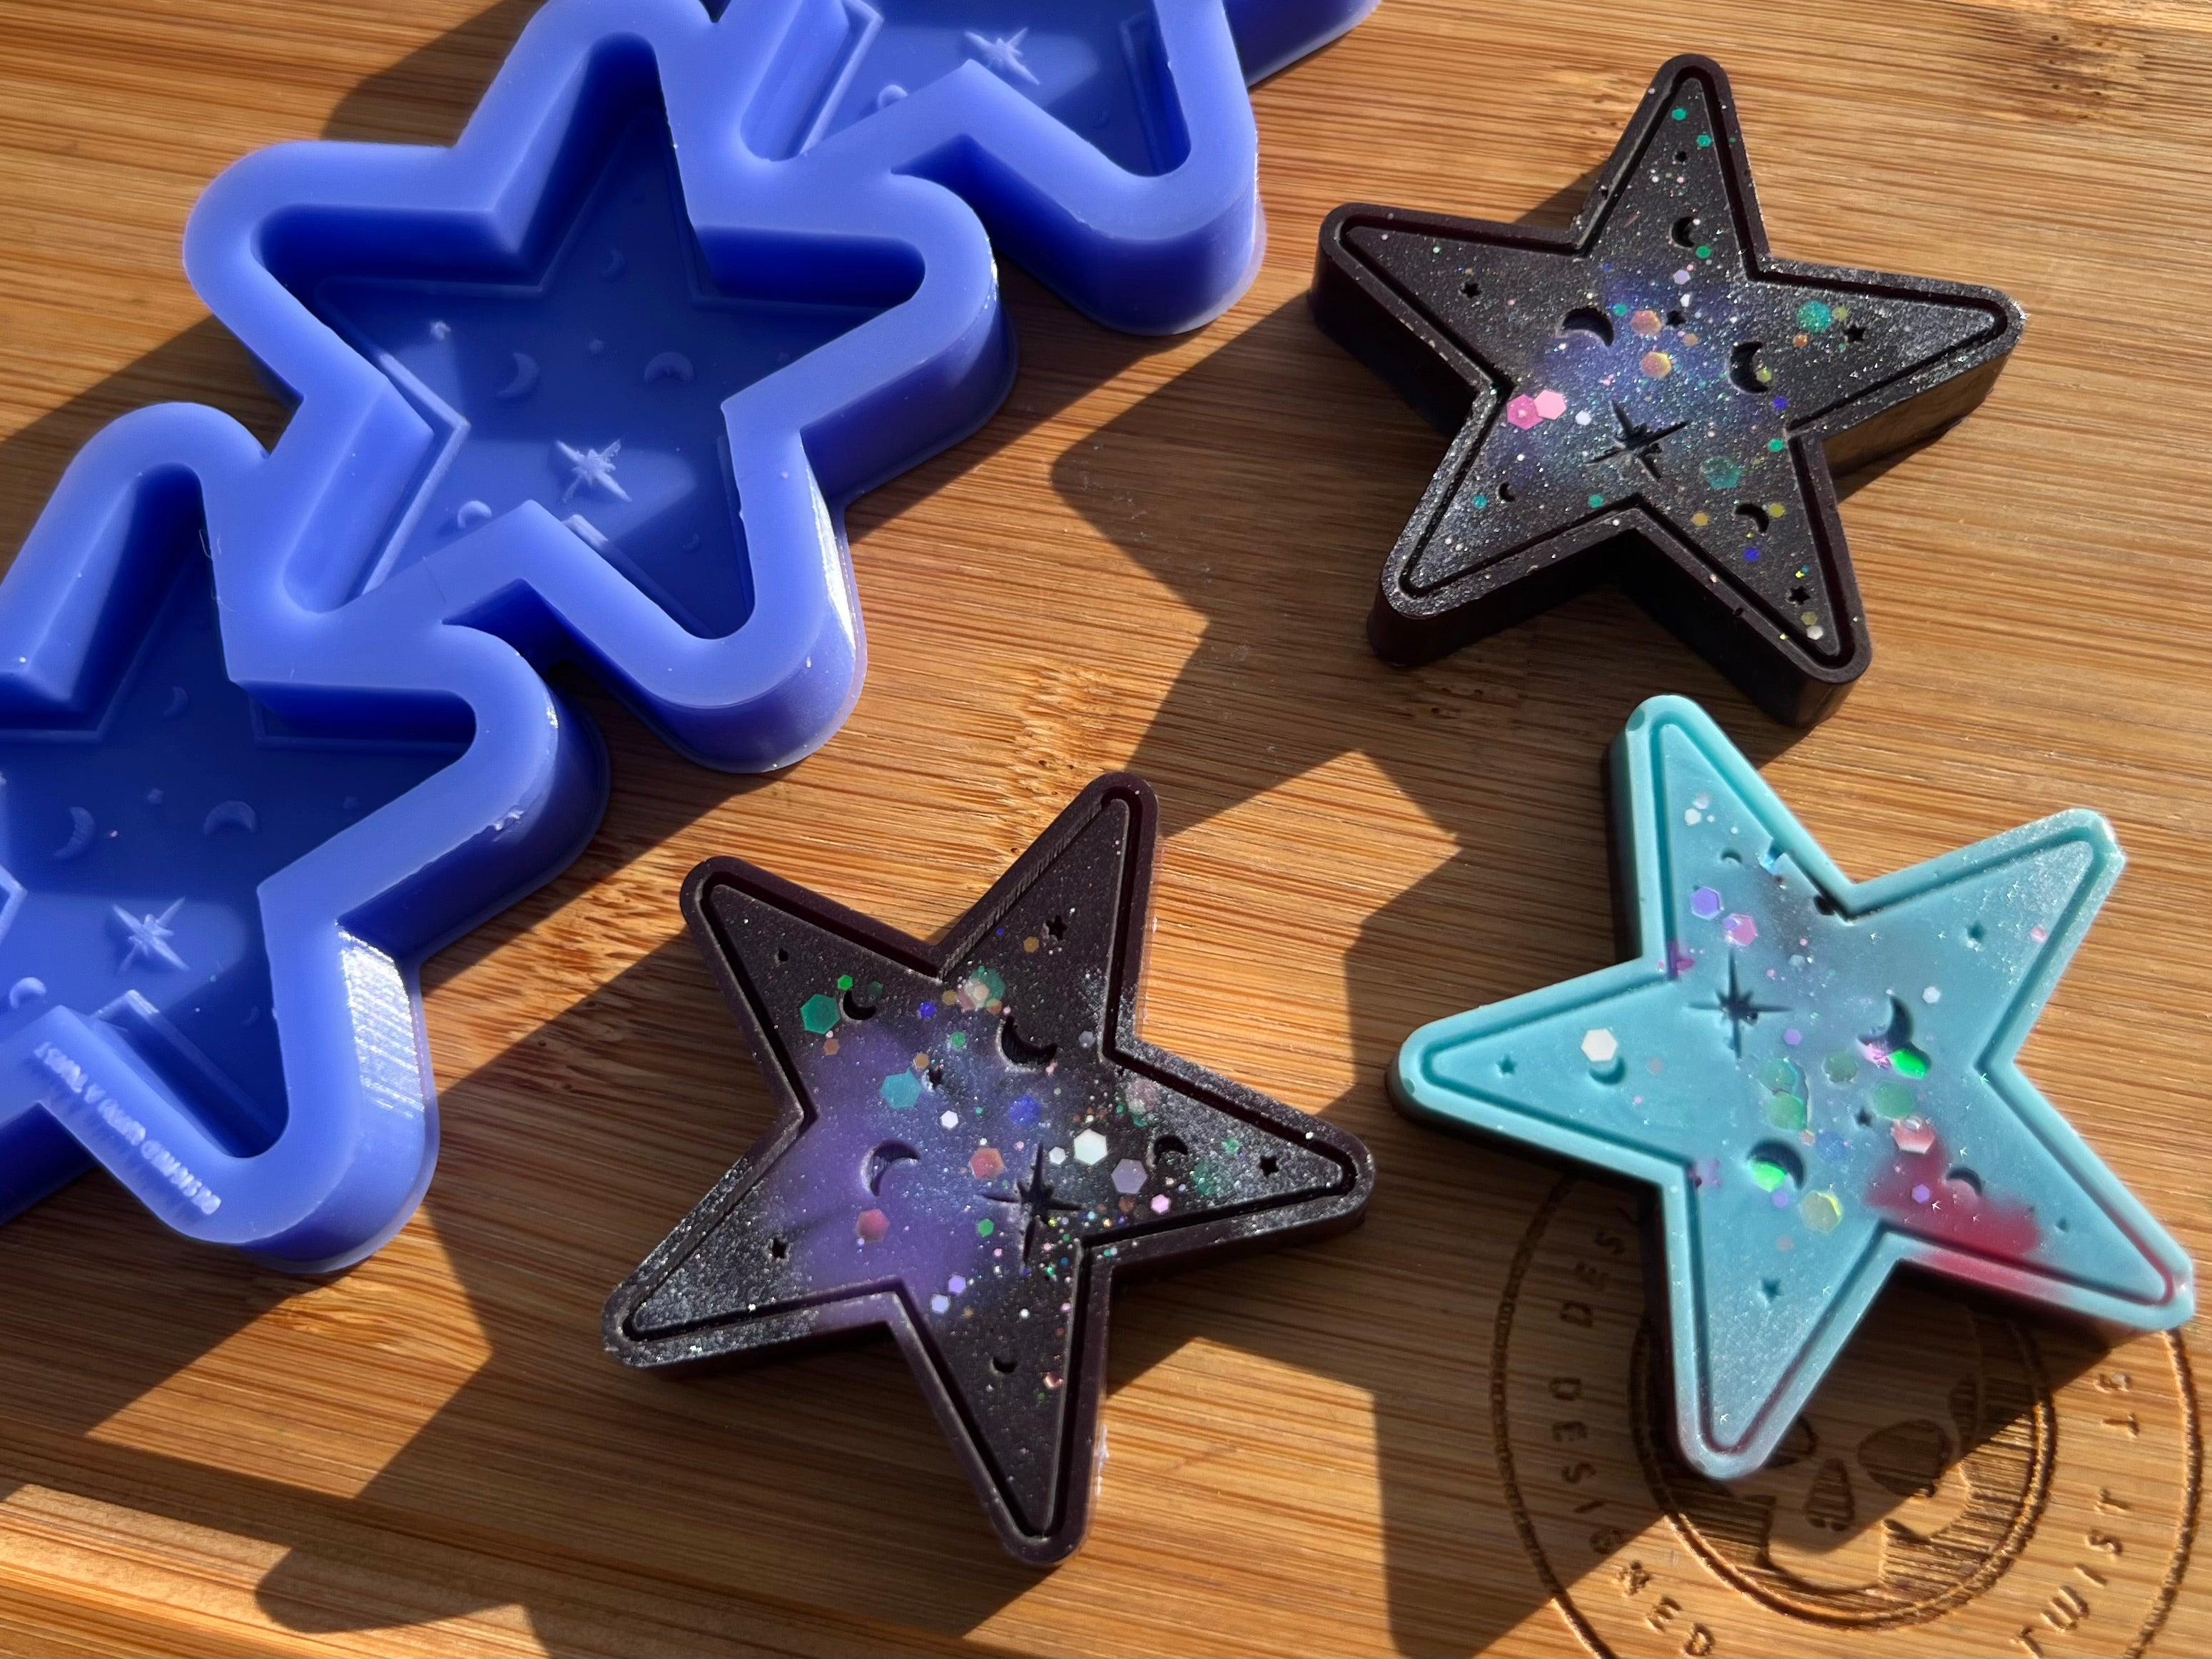 Celestial Star Silicone Mold - Designed with a Twist - Top quality silicone molds made in the UK.